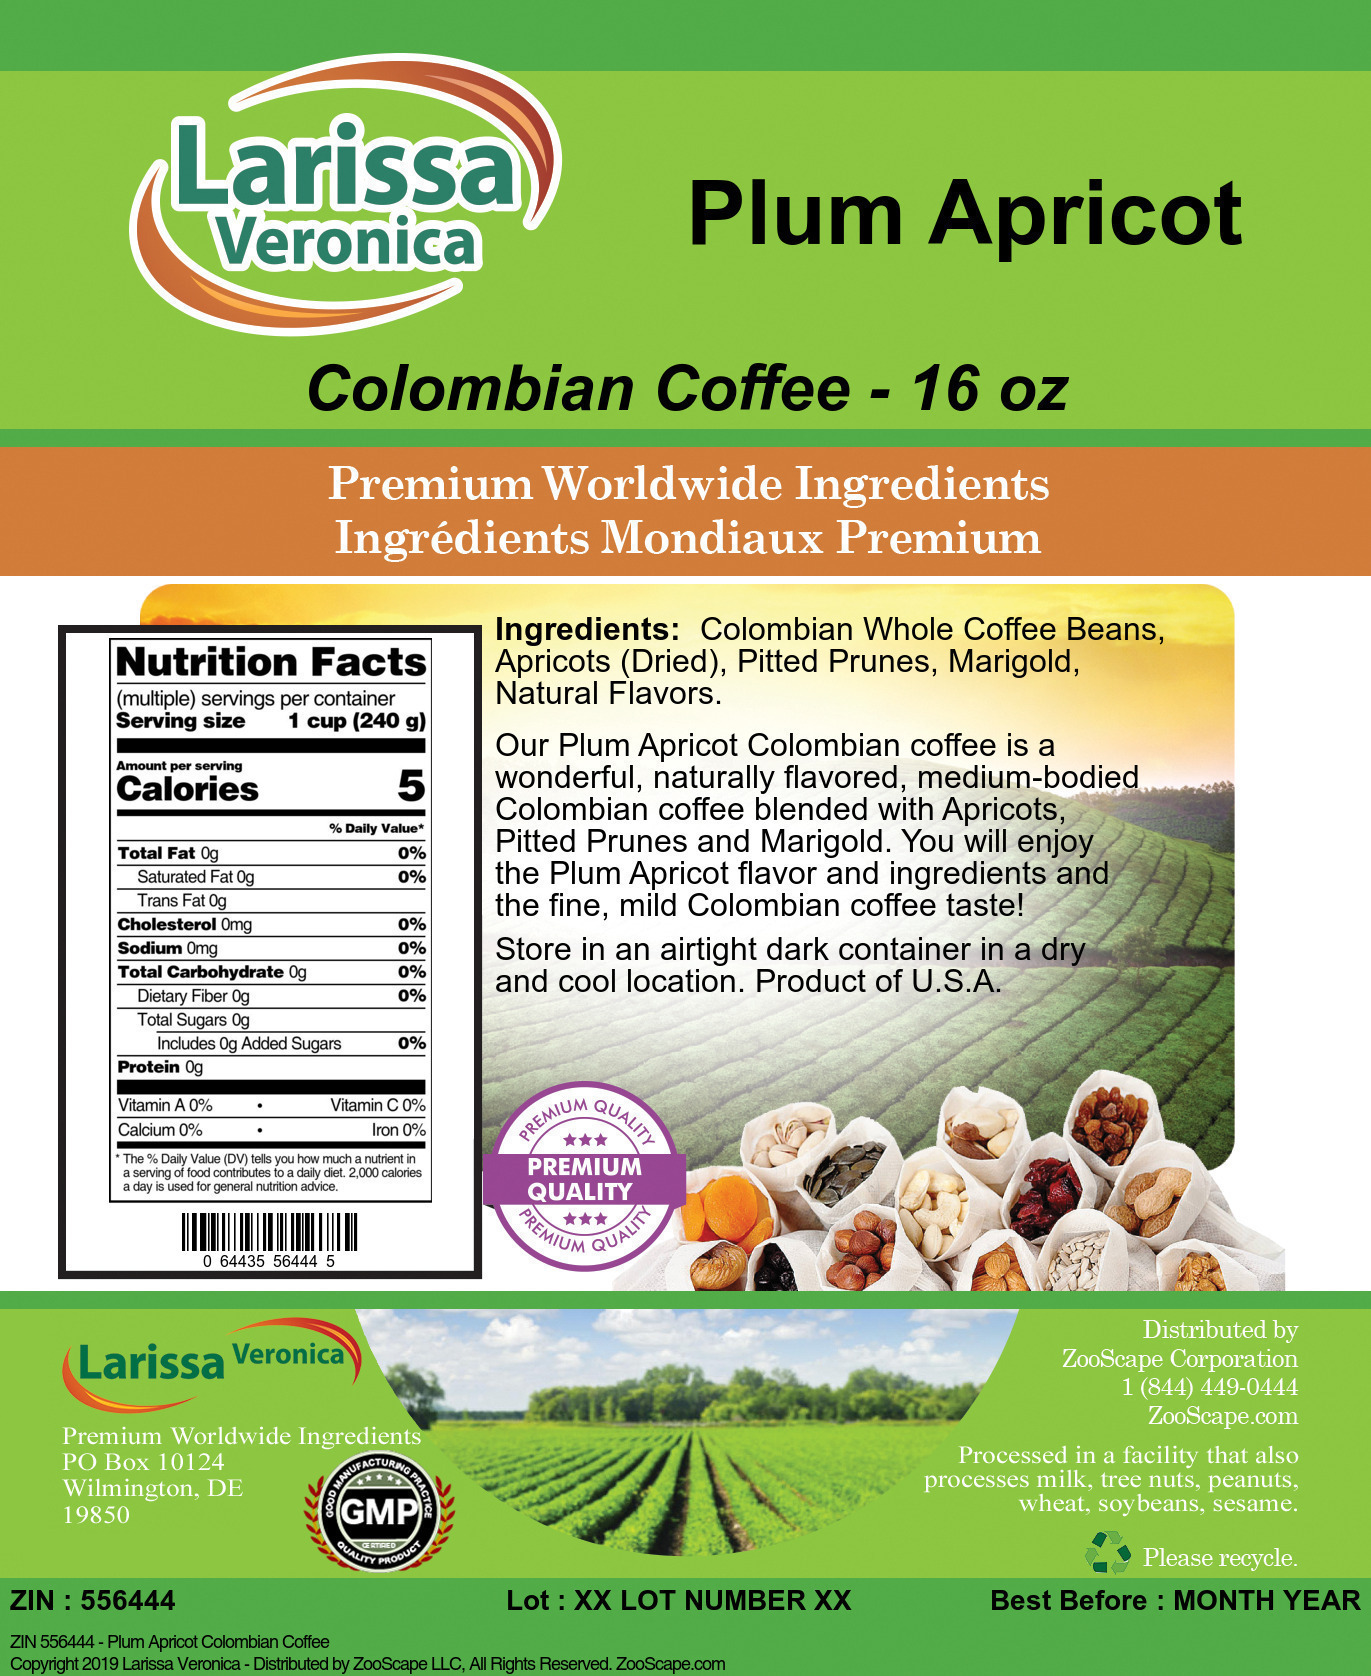 Plum Apricot Colombian Coffee - Label